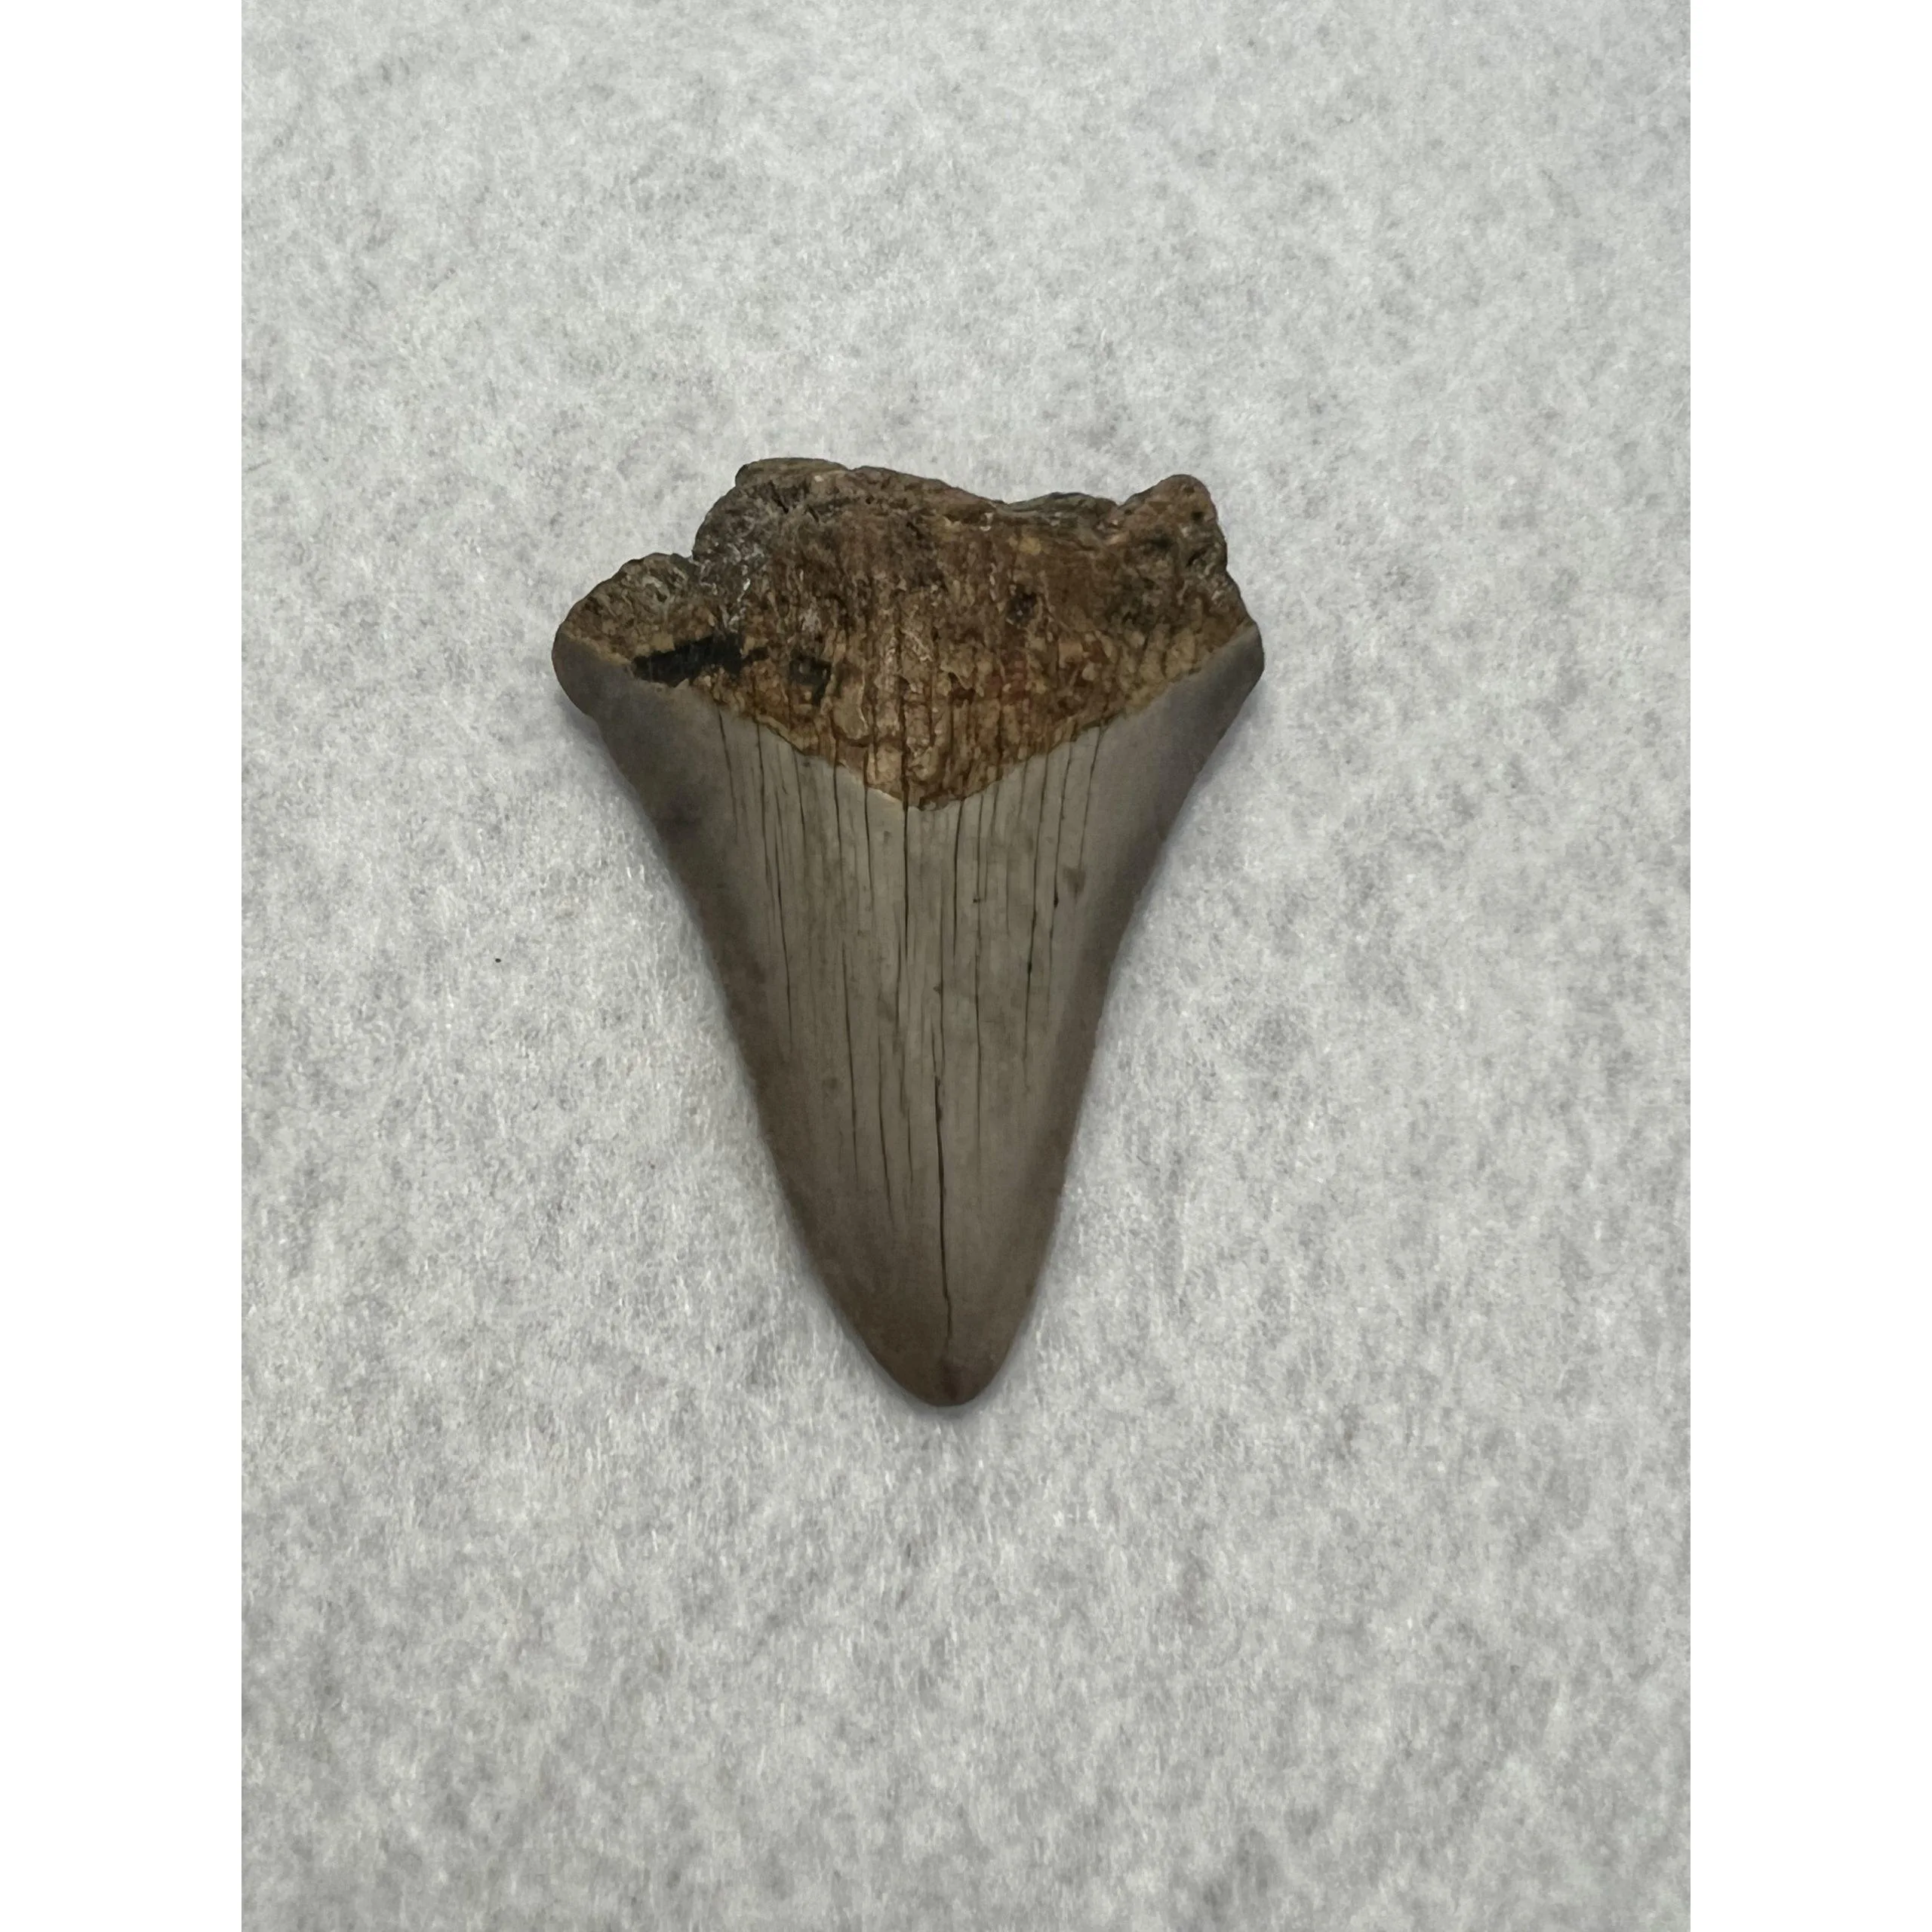 Megalodon Tooth South Carolina 2.77 inch Prehistoric Online